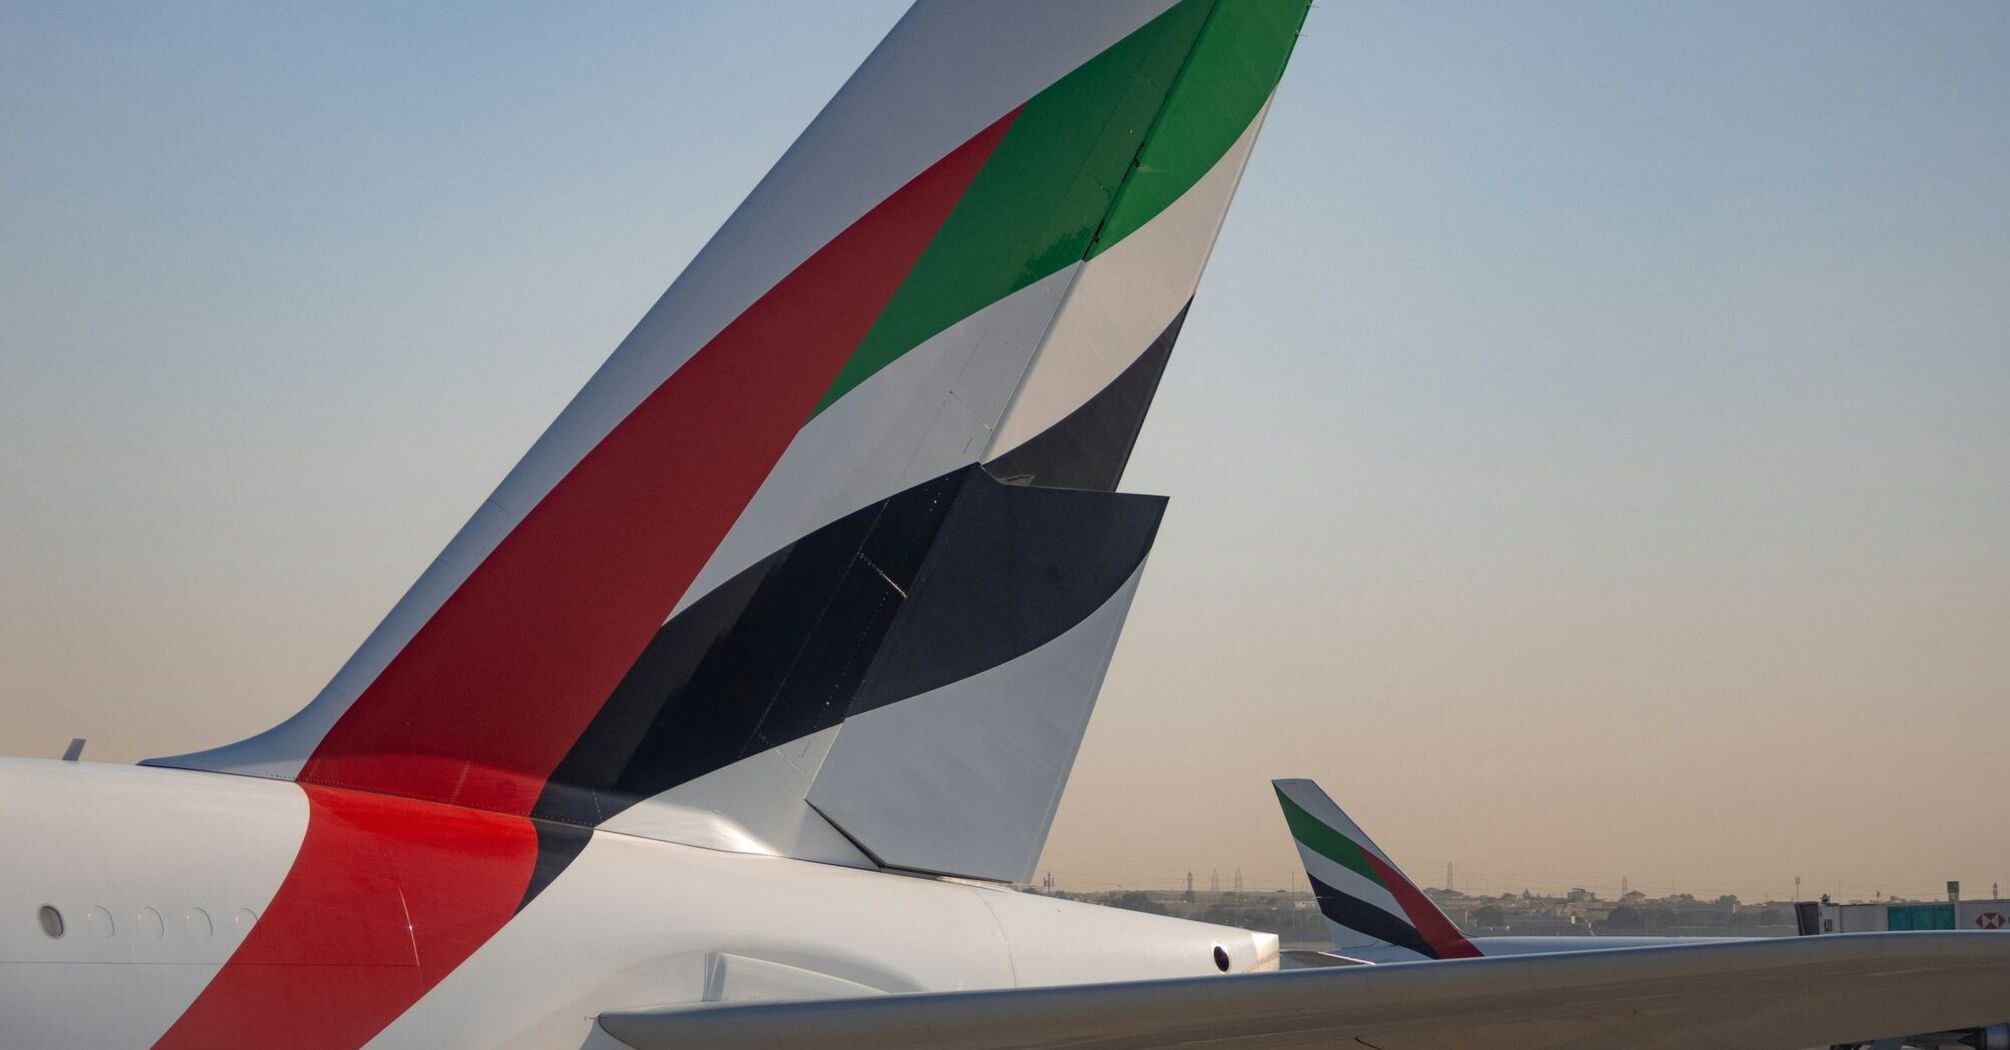 The tail fins of Emirates aircraft with the distinctive red, green, white, and black design on a tarmac